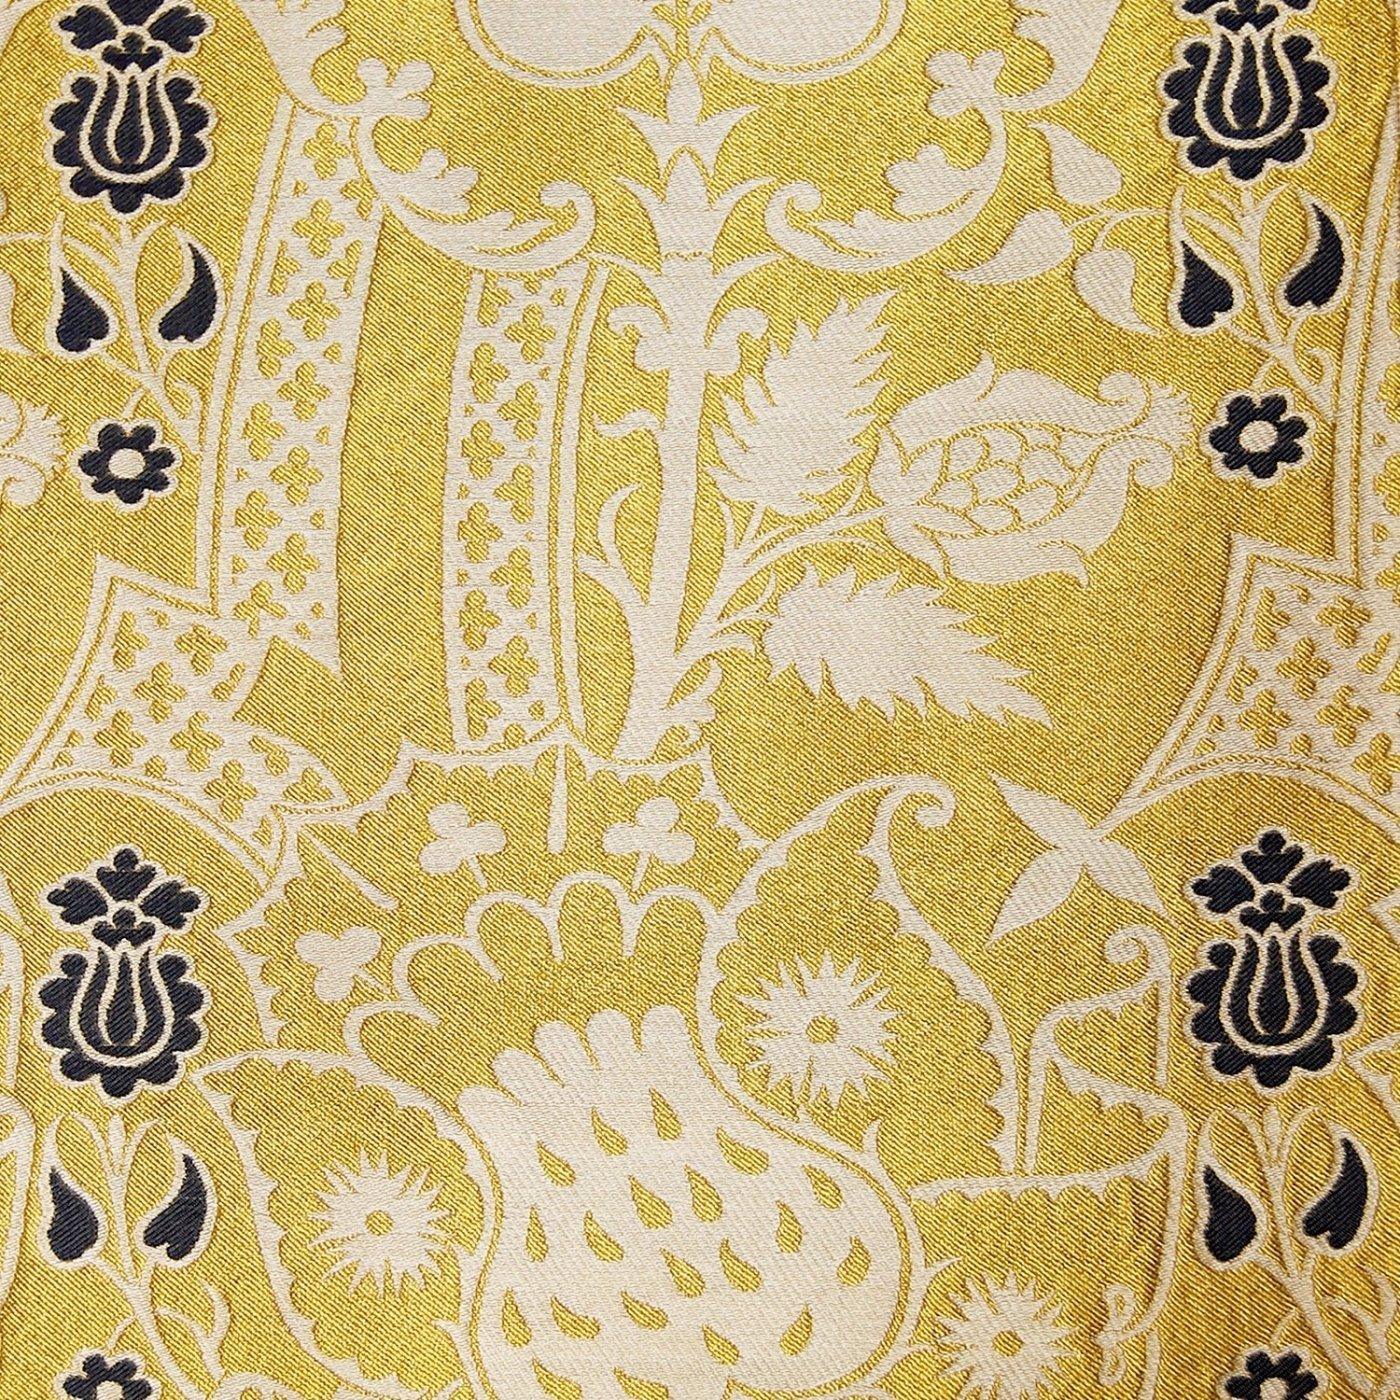 Spanish Chasuble in White/Gold/Blue Comper Strawberry - Watts & Co. (international)